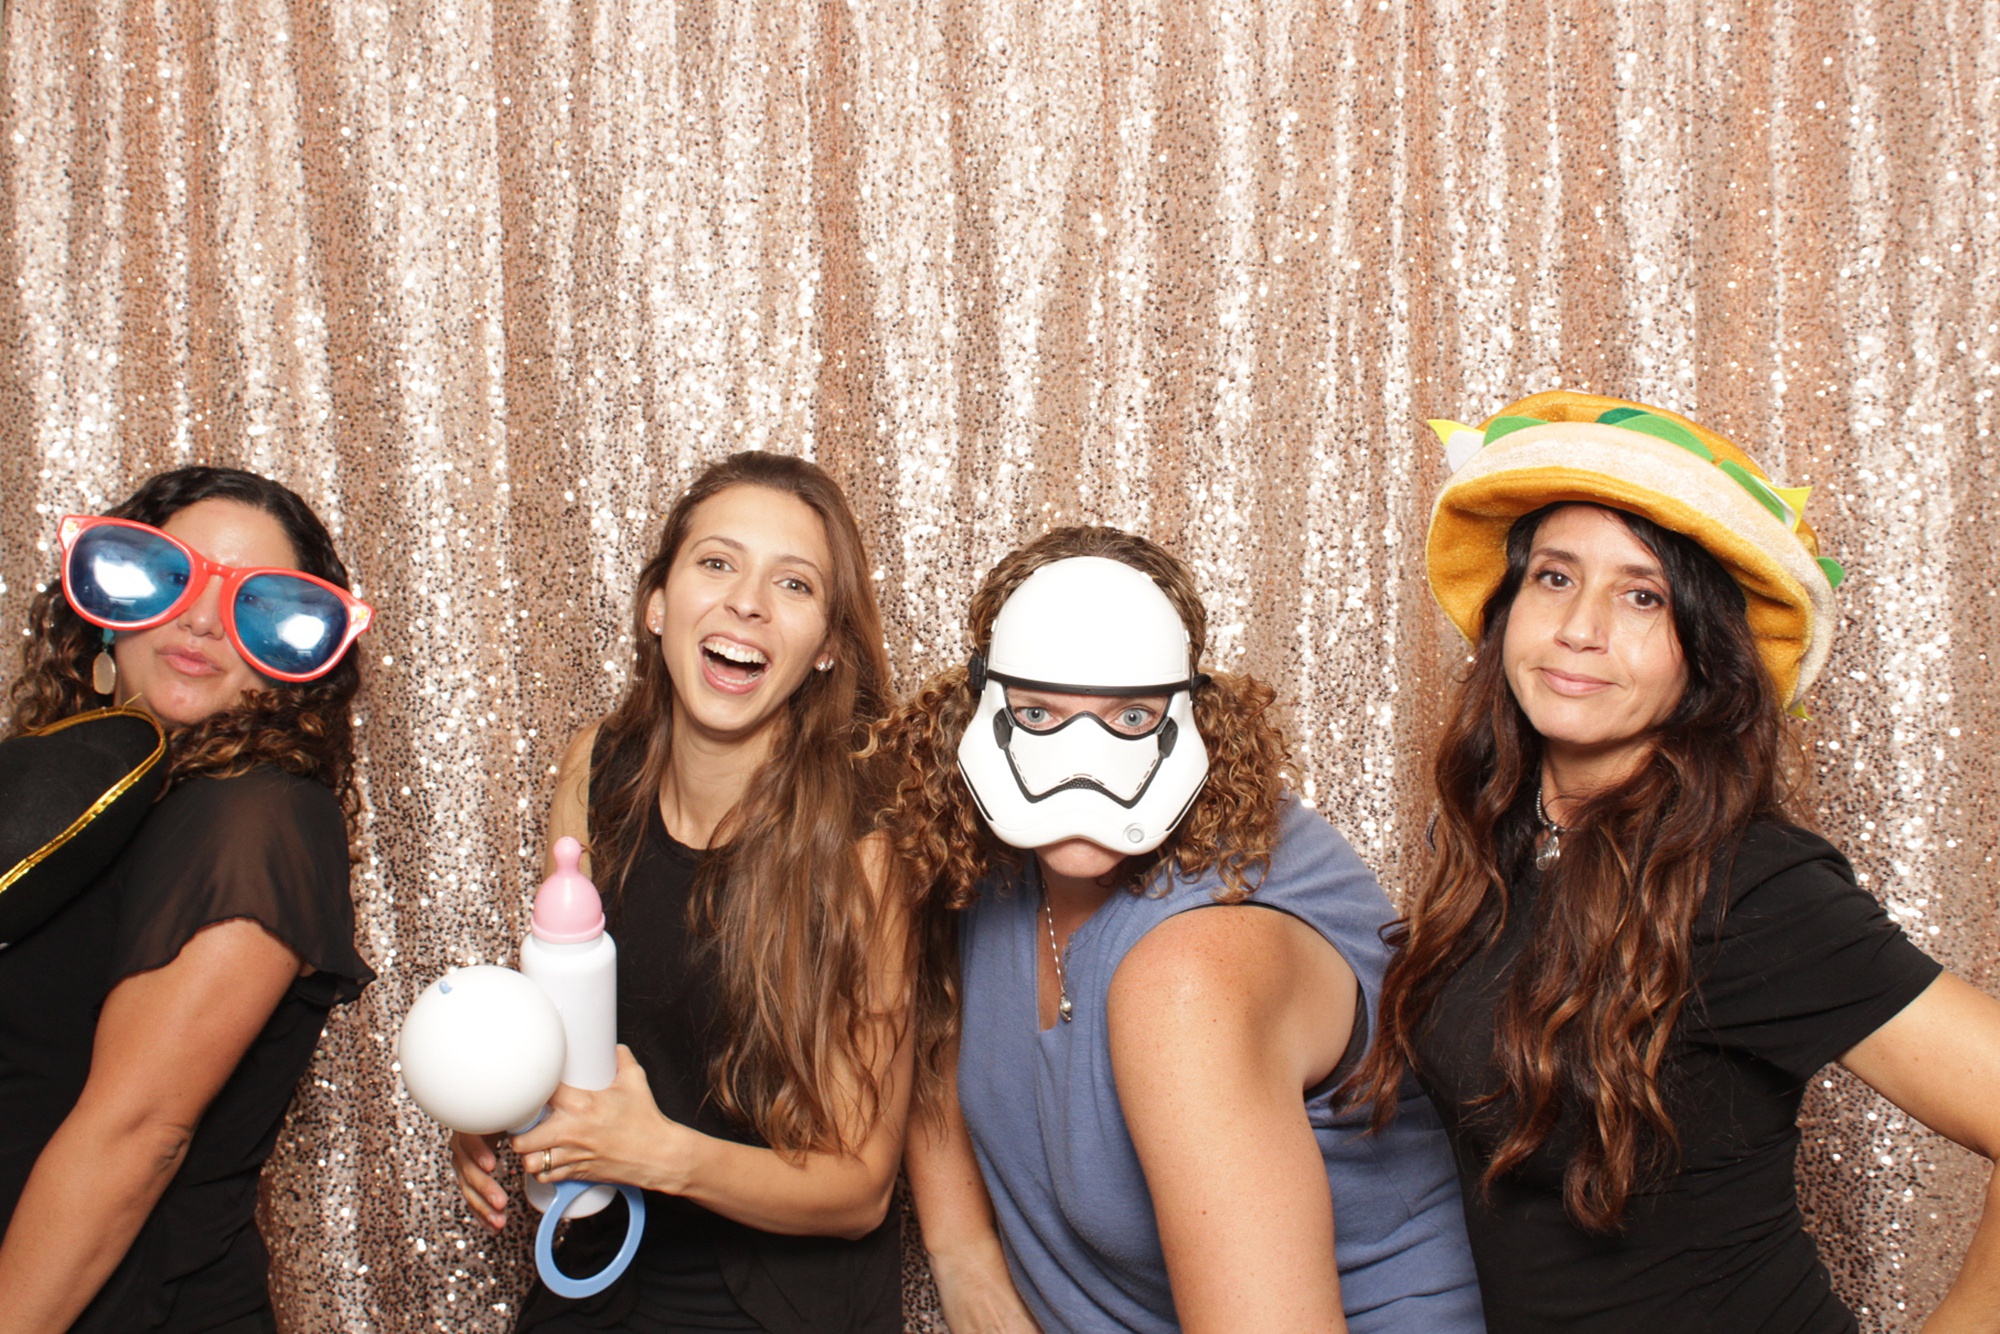 photo booth fun during New Jersey wedding reception